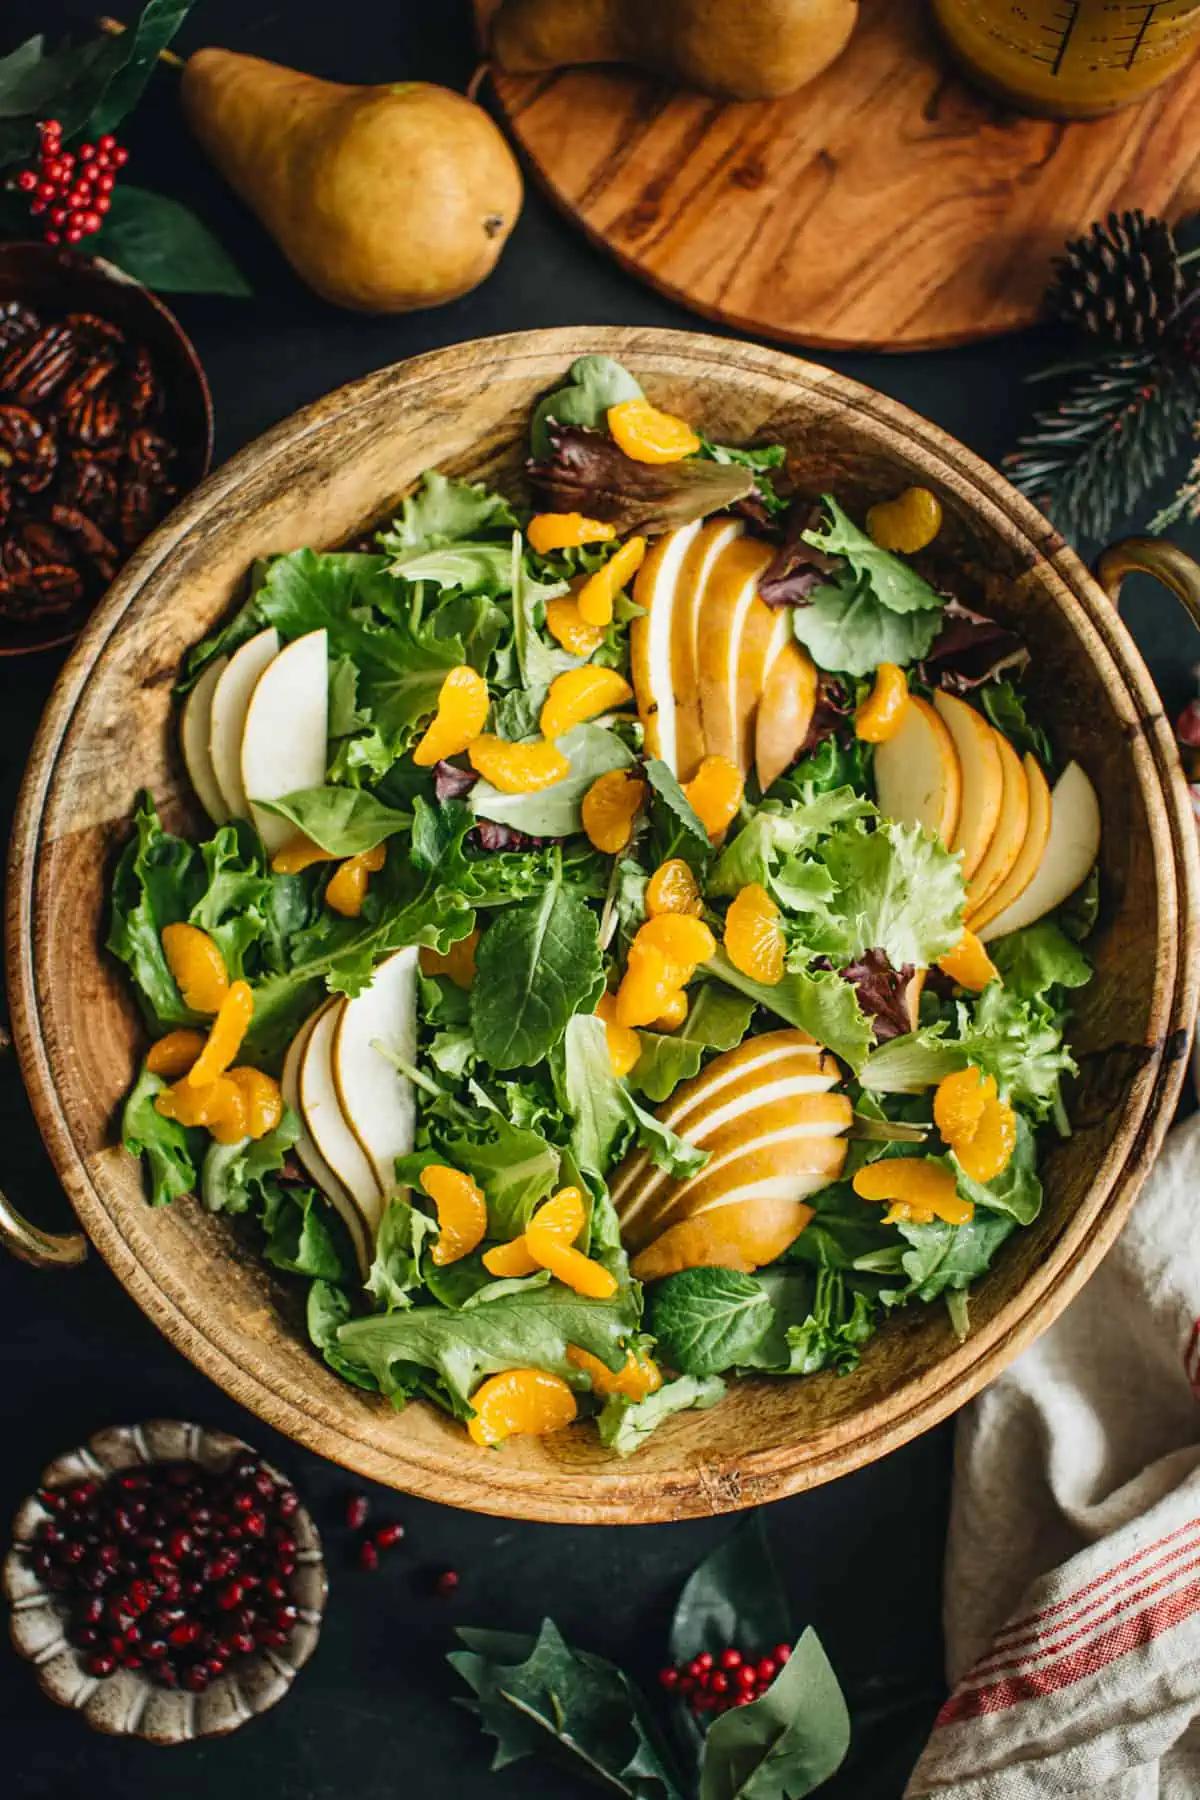 Mixed greens topped with sliced pears and mandarin oranges for preparing Christmas Salad.